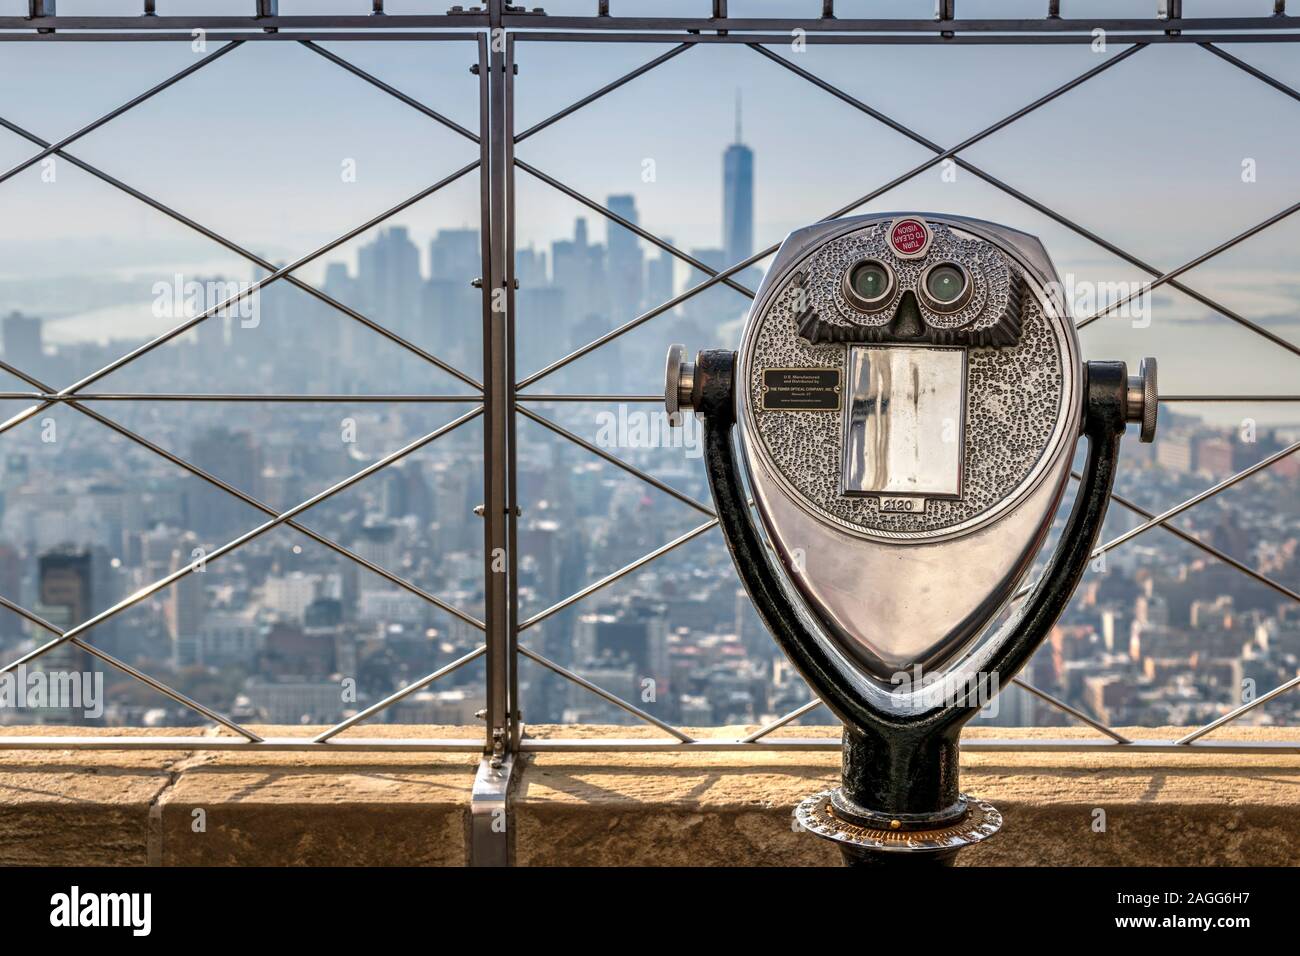 Telescope with blurred Lower Manhattan skyline in the background, Empire State Building's observation deck, Manhattan, New York, USA Stock Photo